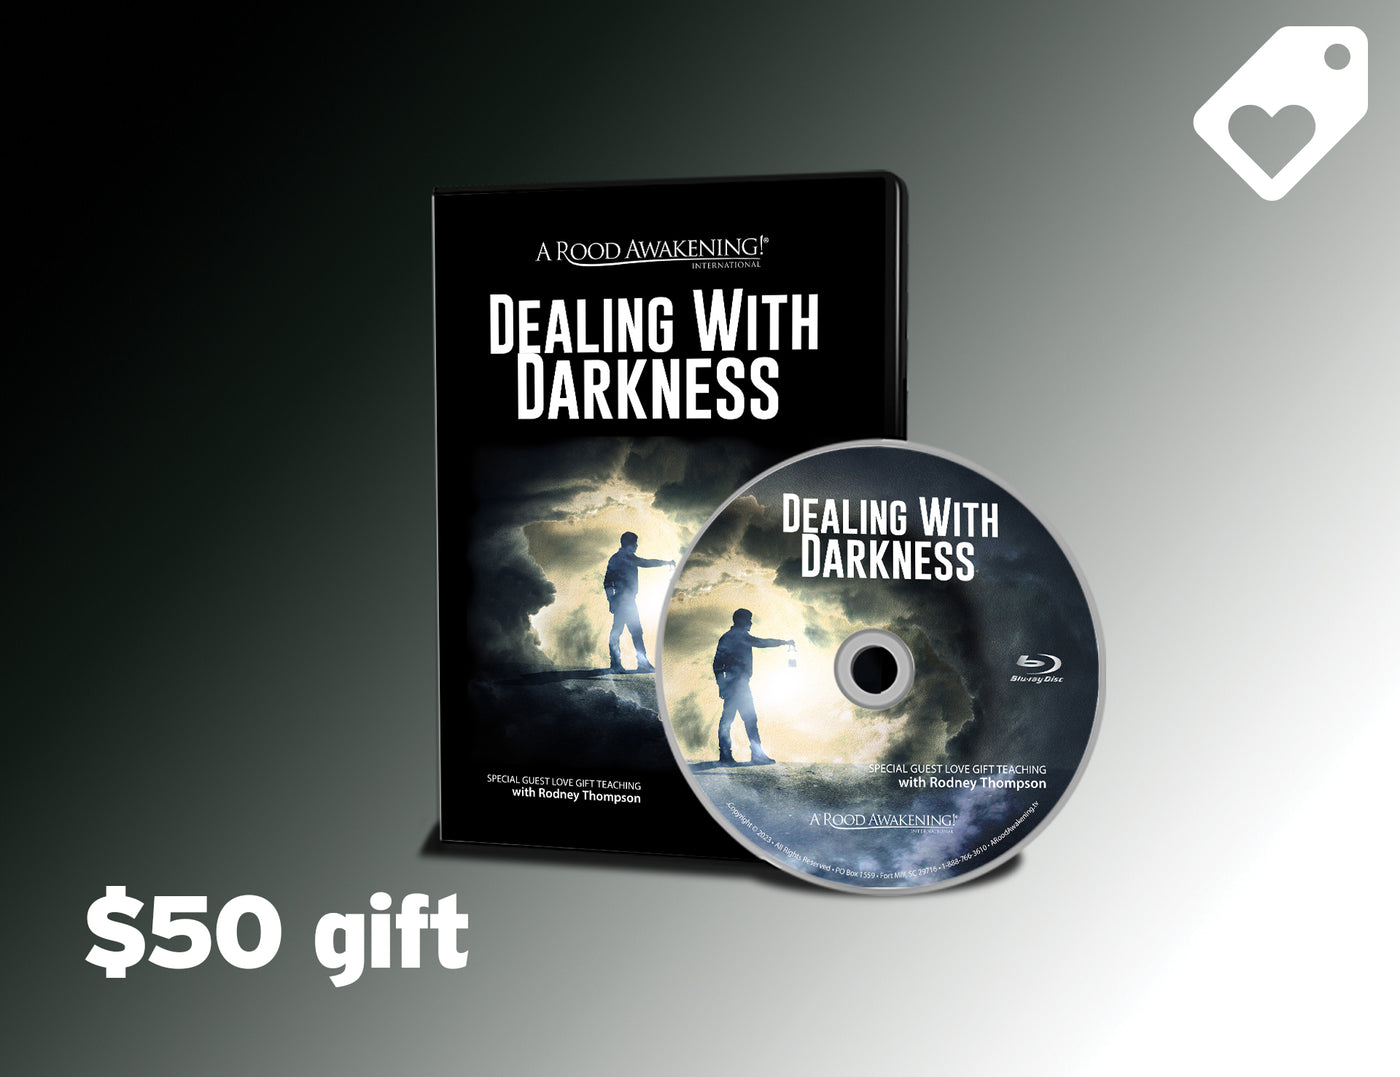 March 2023 Love Gift Teaching: "Dealing With Darkness"